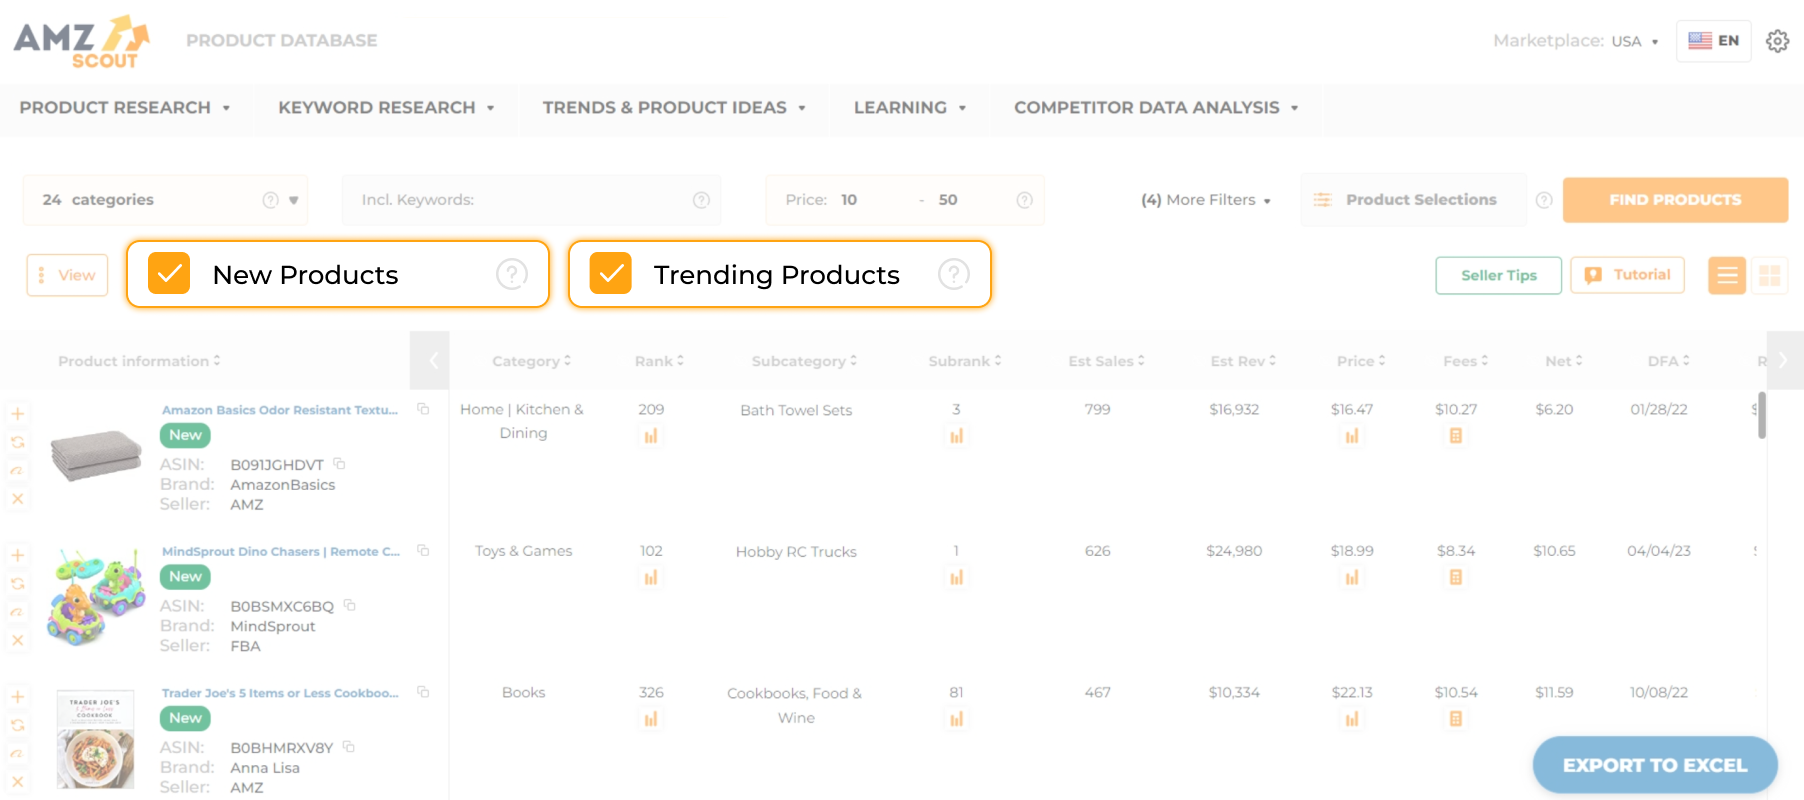 How to find New Products and Trending Products in the Product Database